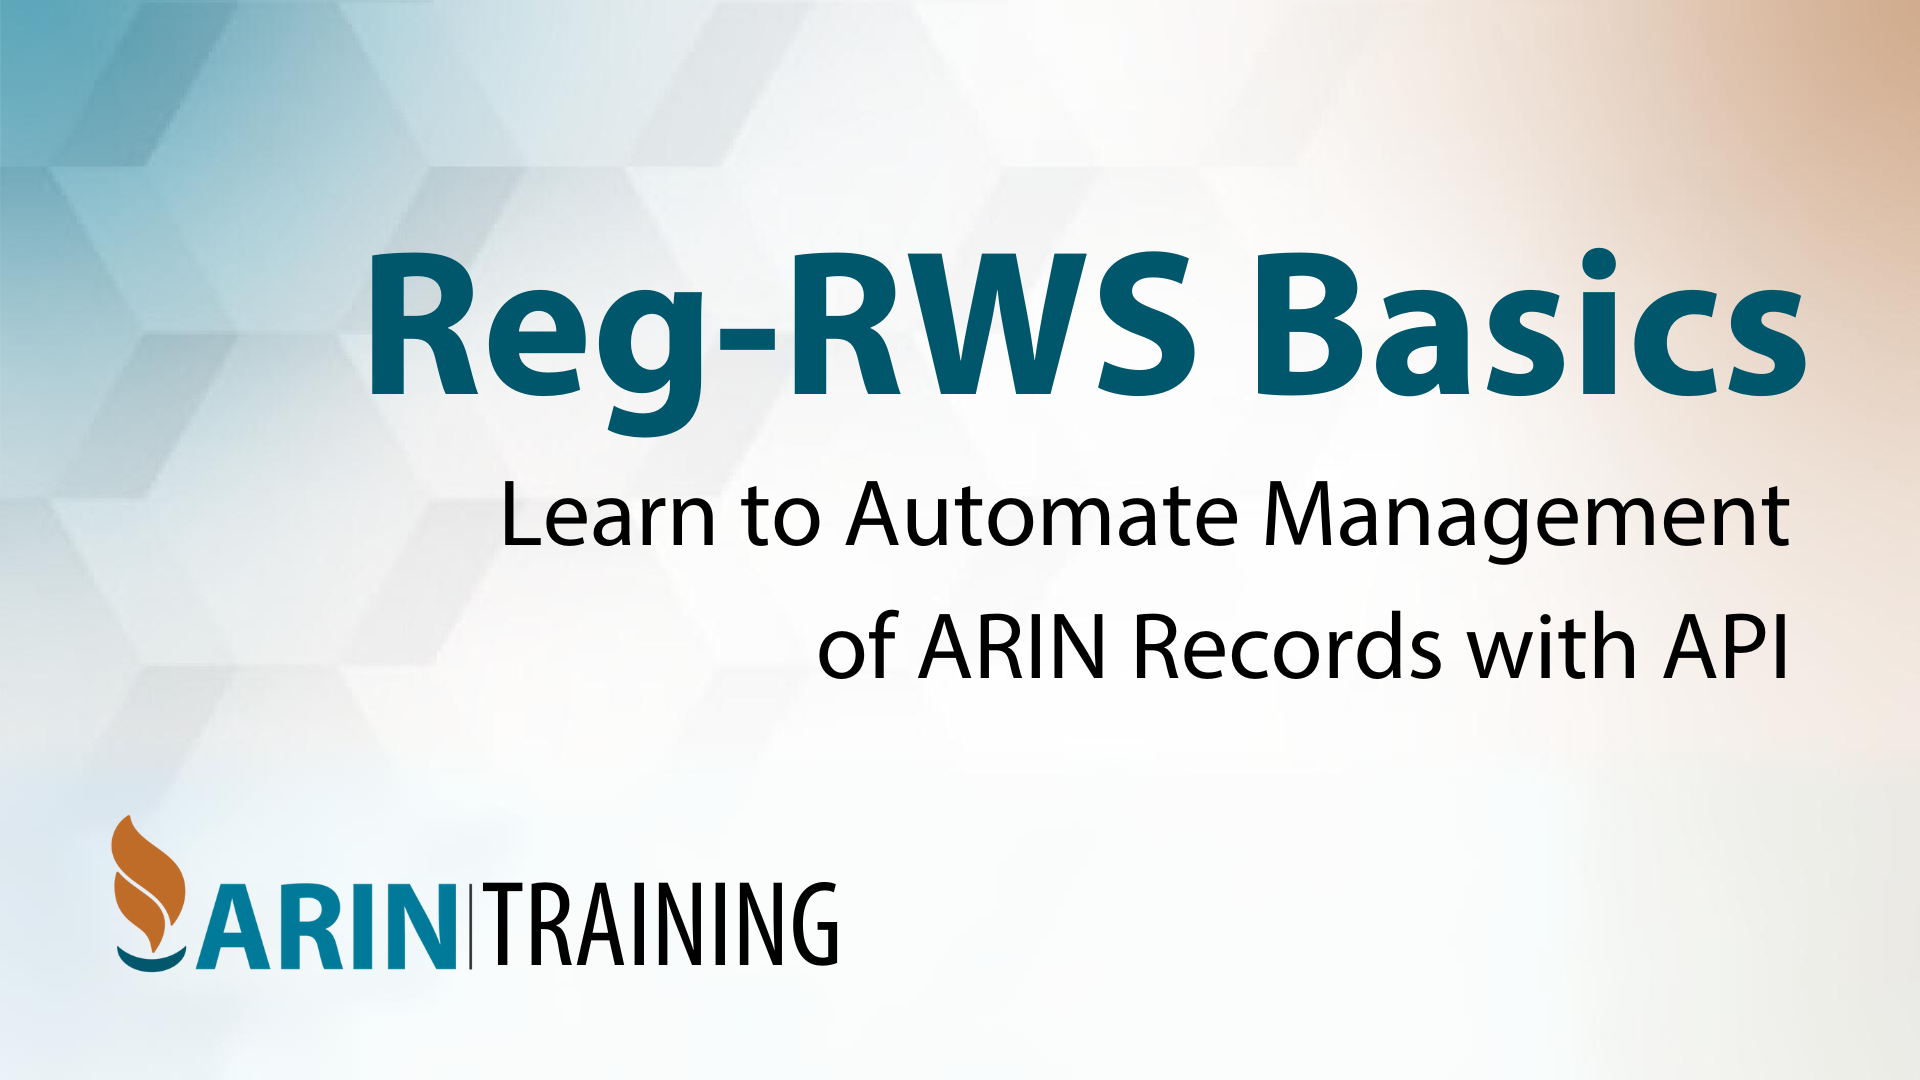 Read the blog Reg-RWS Basics: Learn to Automate Management of ARIN Records with API